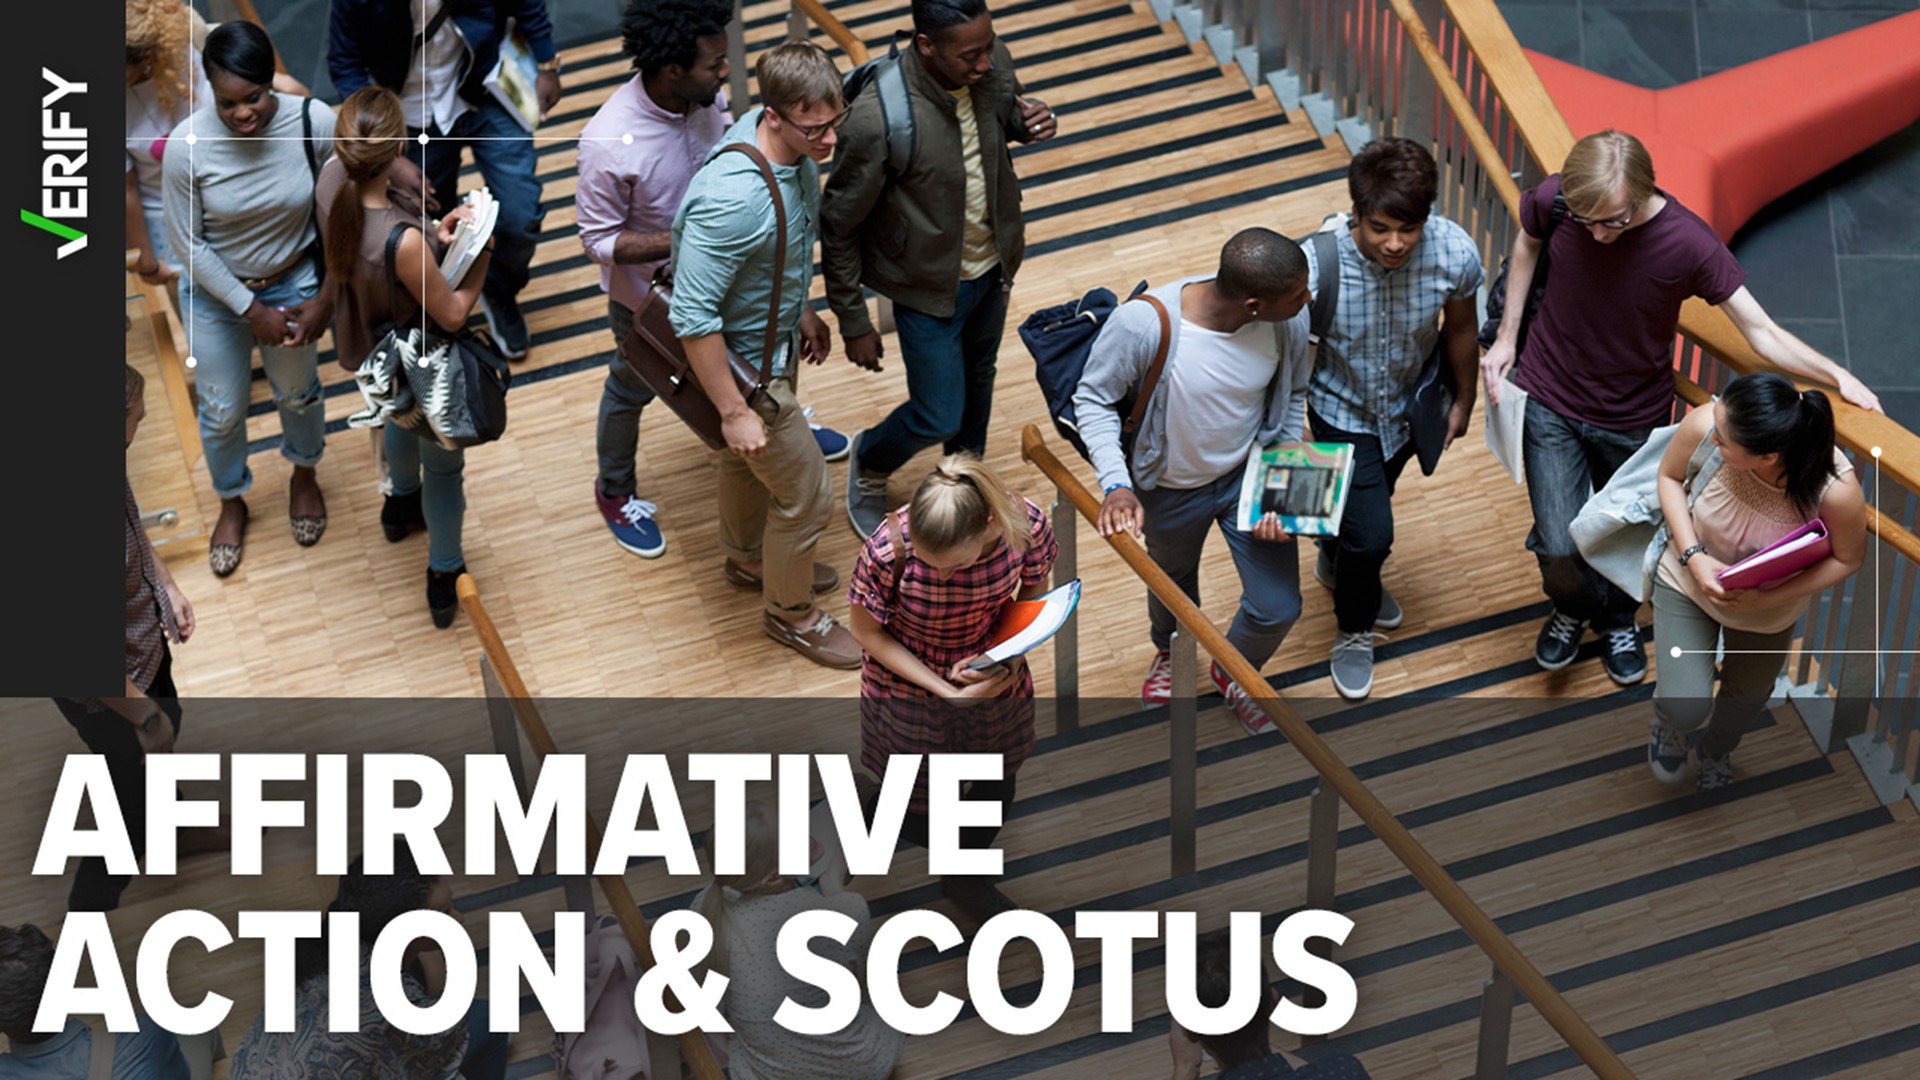 The Supreme Court decision on affirmative action leaves colleges room to consider essays in which the applicant writes about their race.